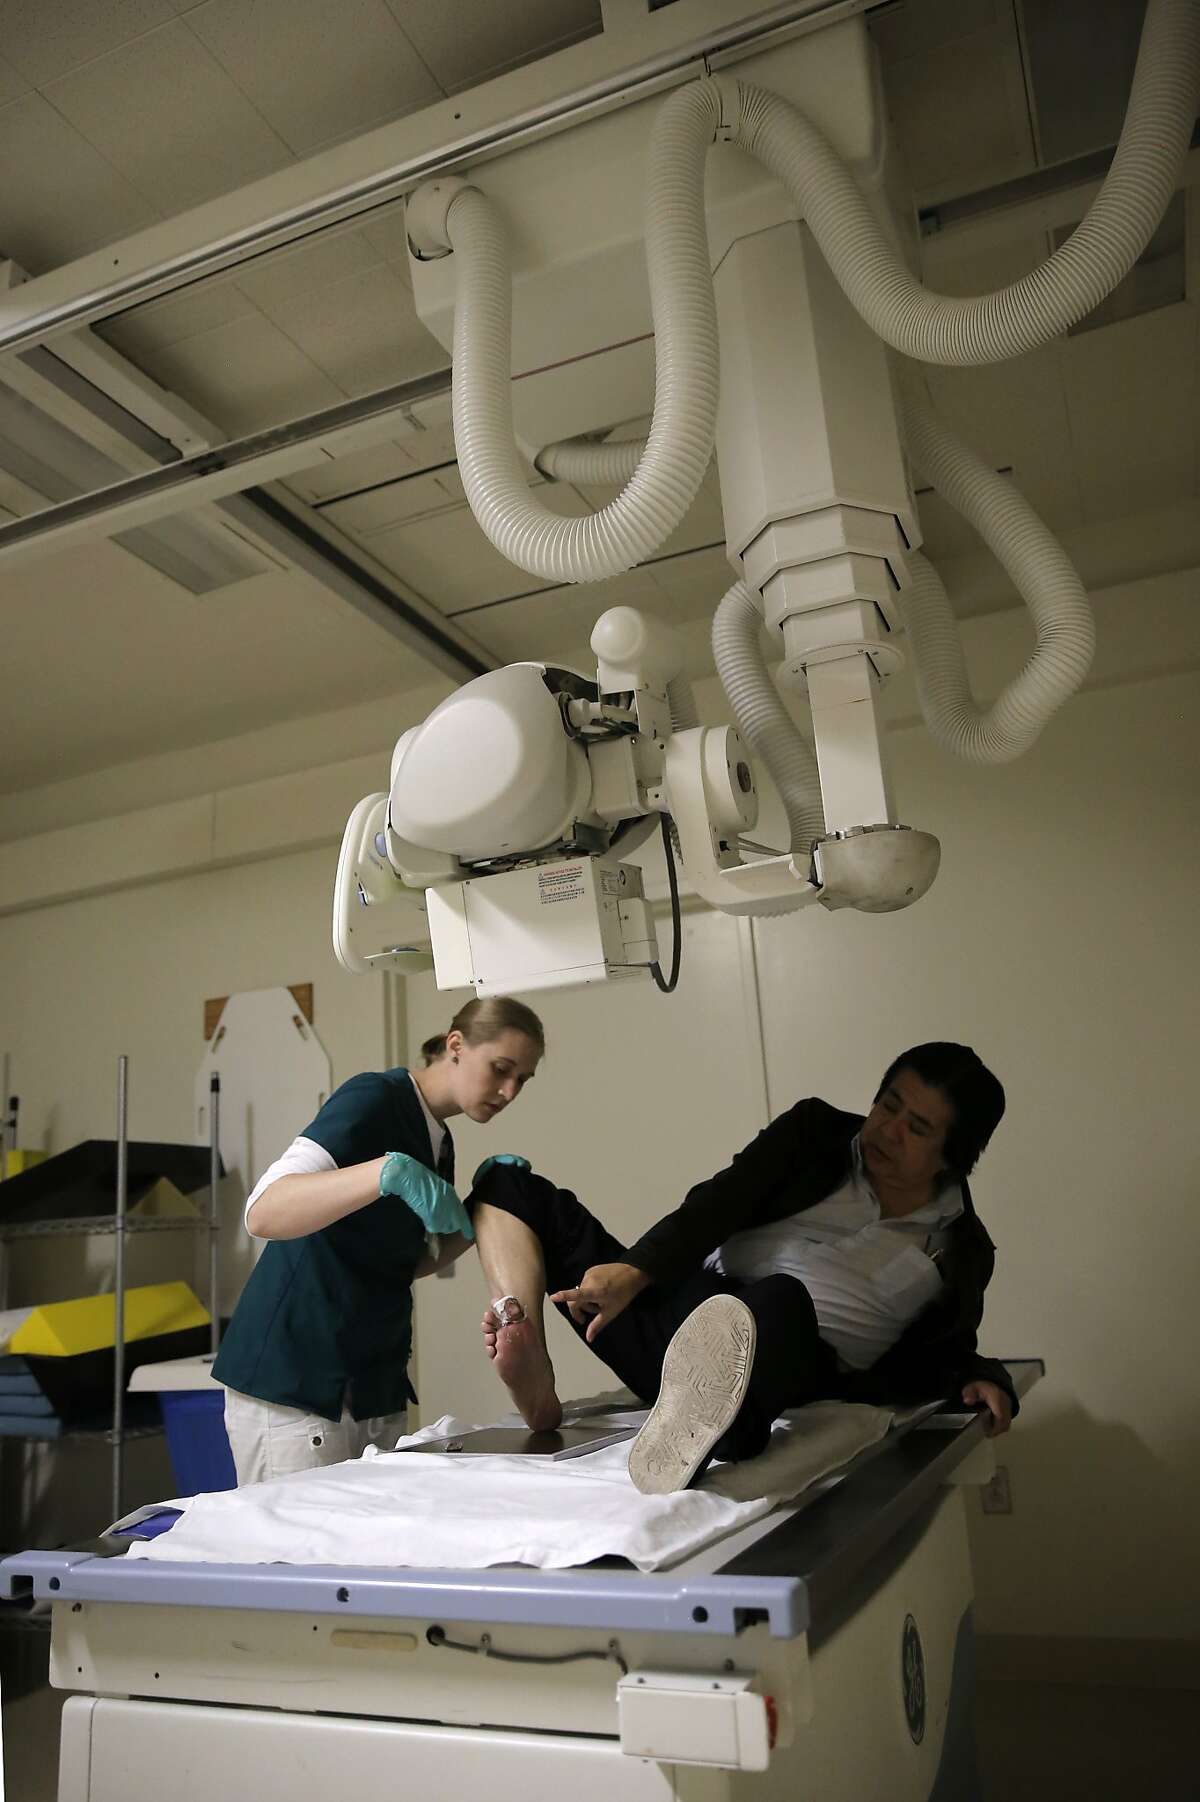 Melissa Mrizek, a student radiology technologist prepares to x-ray the foot of Luis Pimentel at Seton Medical Center, which is run by the Daughters of Charity, in Daly City Calif., as seen on Fri. March 13, 2015